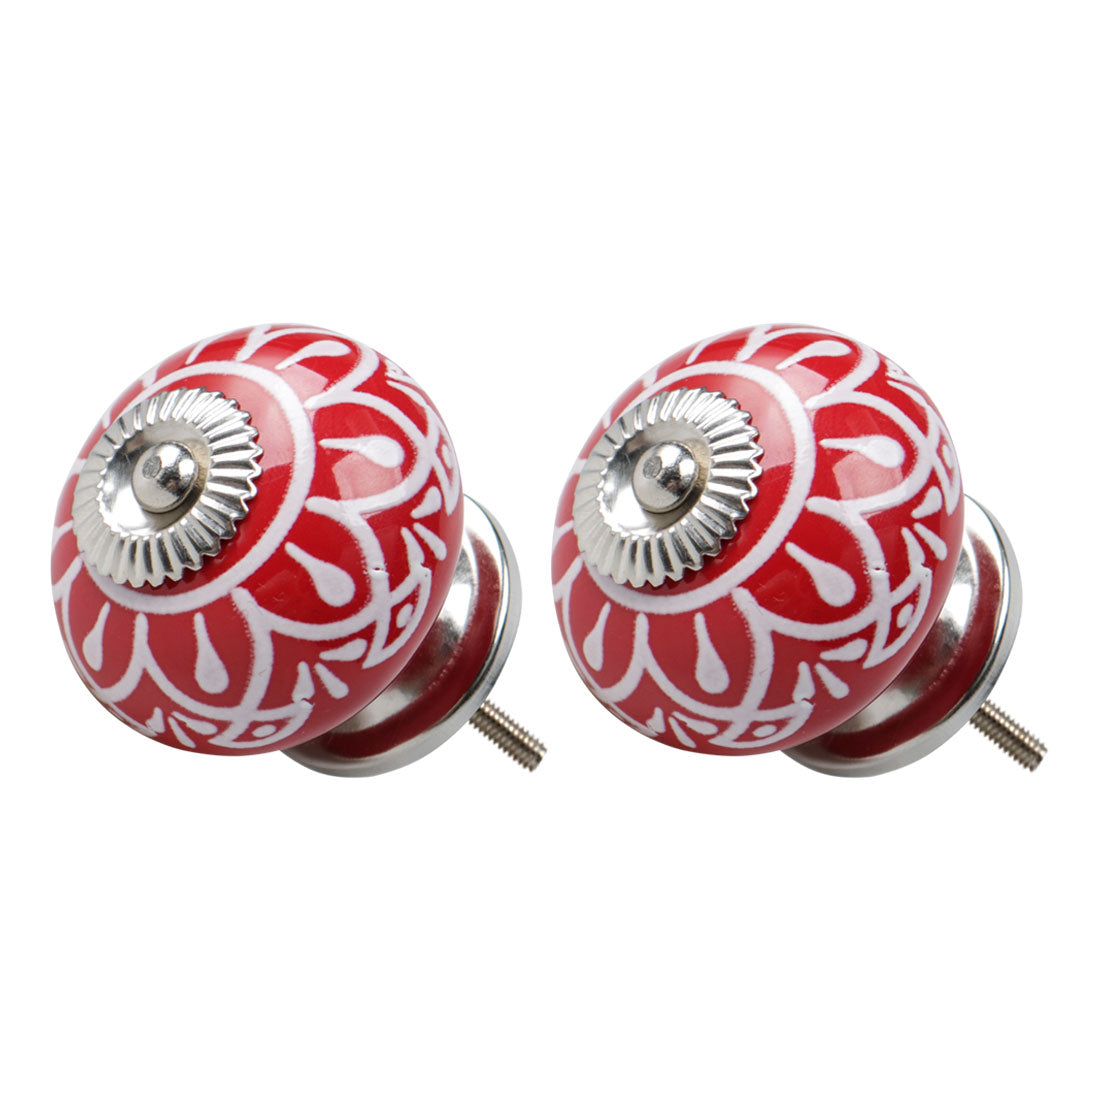 uxcell Uxcell Ceramic Vintage Knob Drawers Round Pull Handle Cabinet Wardrobe Door 2pcs, Red